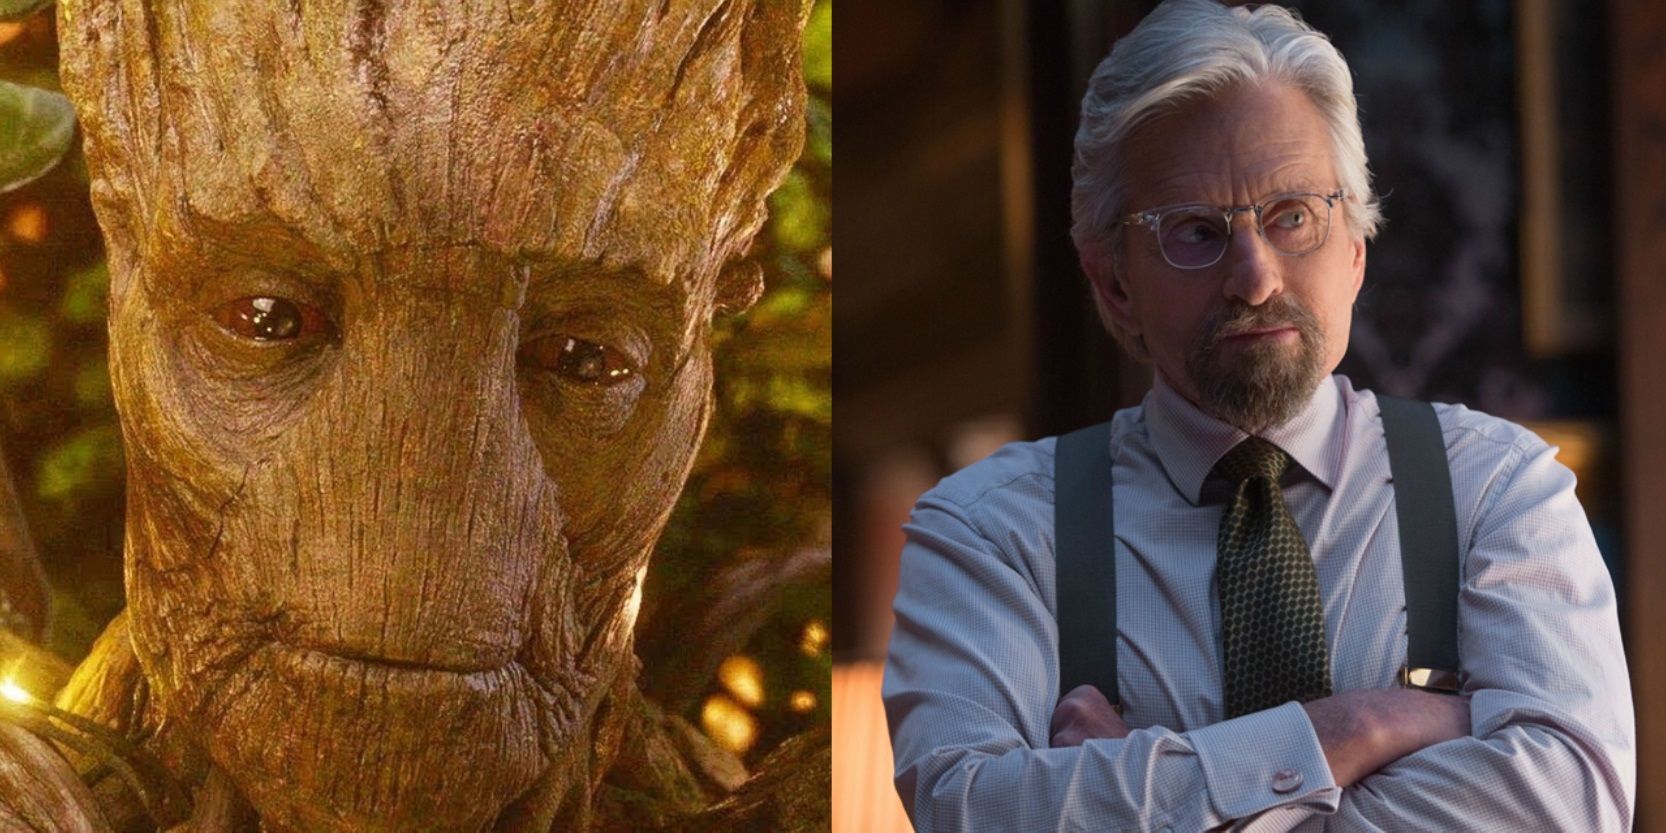 Split image of Groot's death in Guardians of the Galaxy and Hank Pym with his arms crossed in Ant-Man